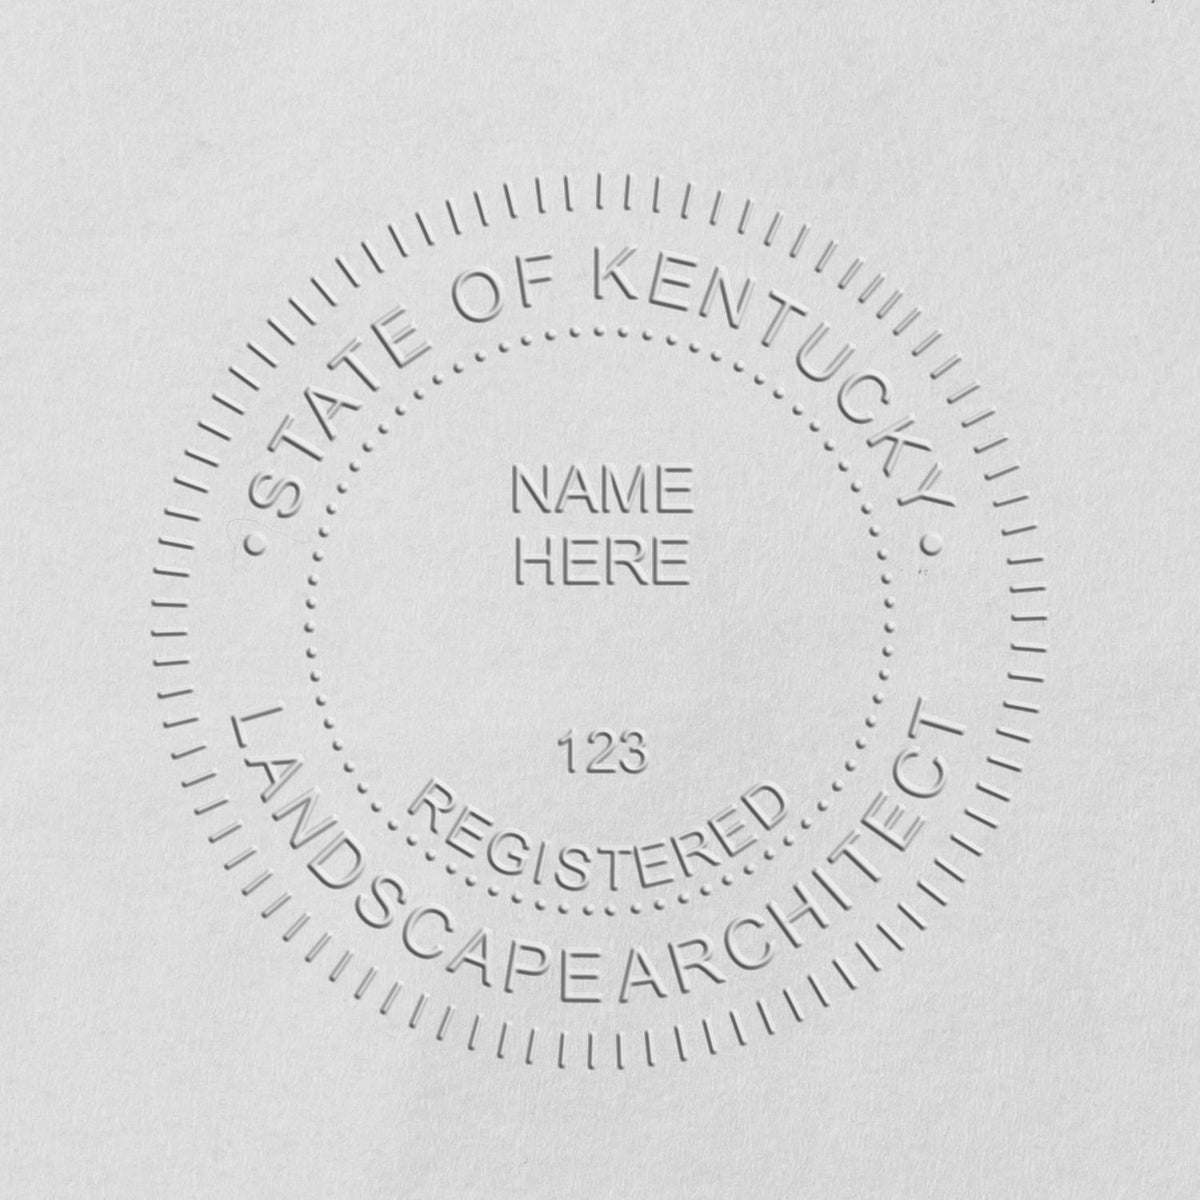 The Gift Kentucky Landscape Architect Seal stamp impression comes to life with a crisp, detailed image stamped on paper - showcasing true professional quality.